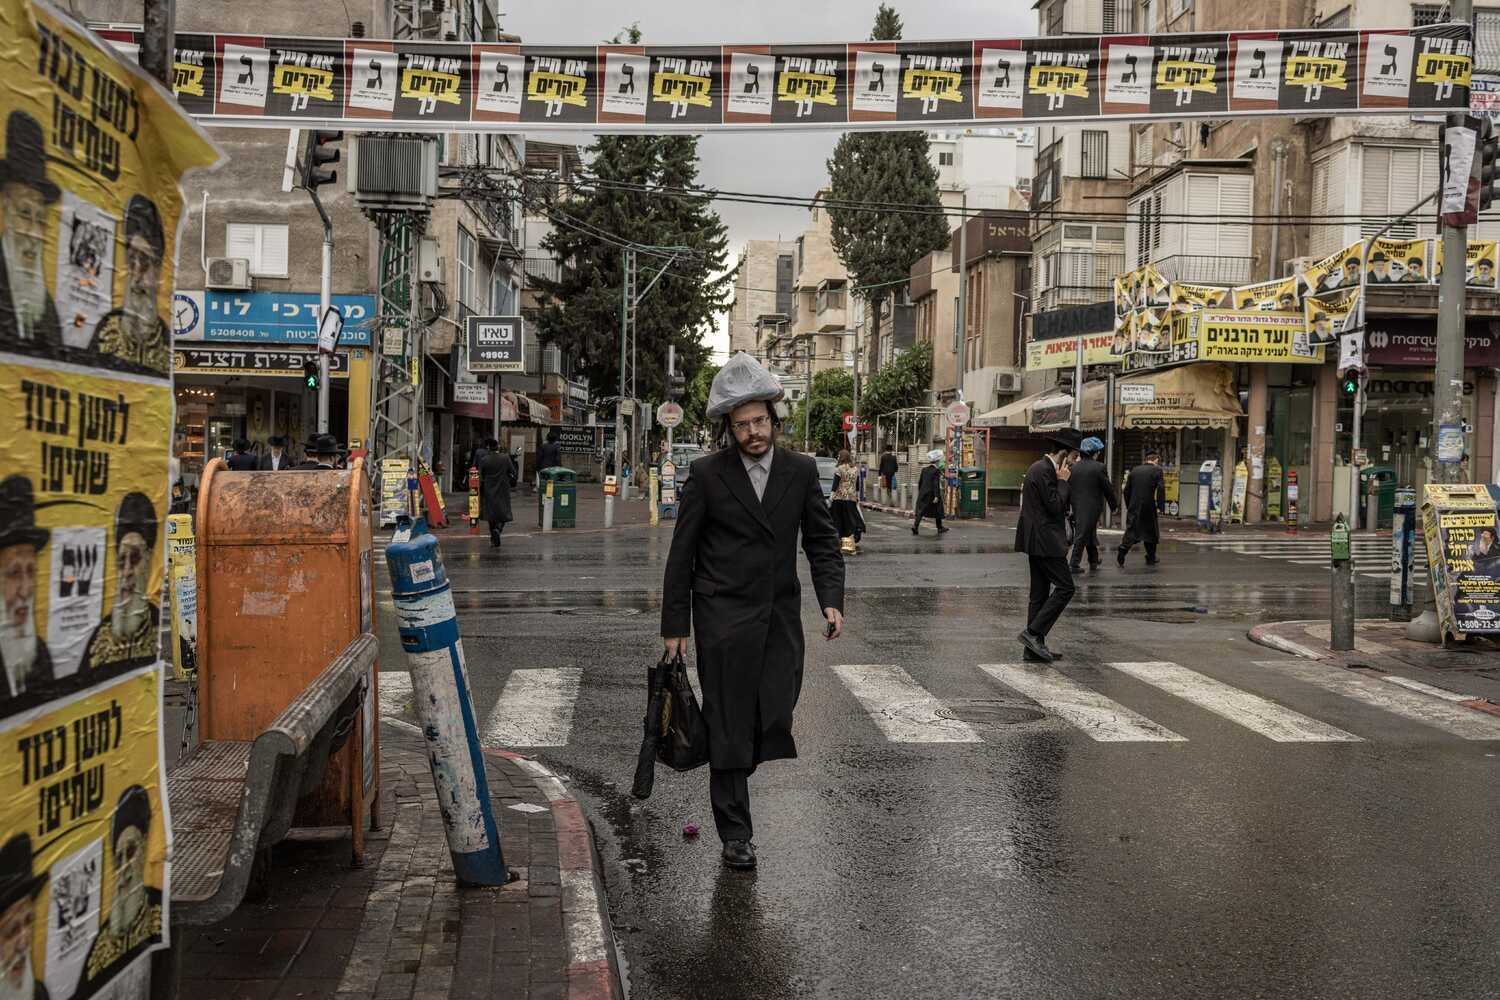 Election signs urging members of the Haredi community to vote for ultra-Orthodox parties in November in Bnei Brak, Israel.